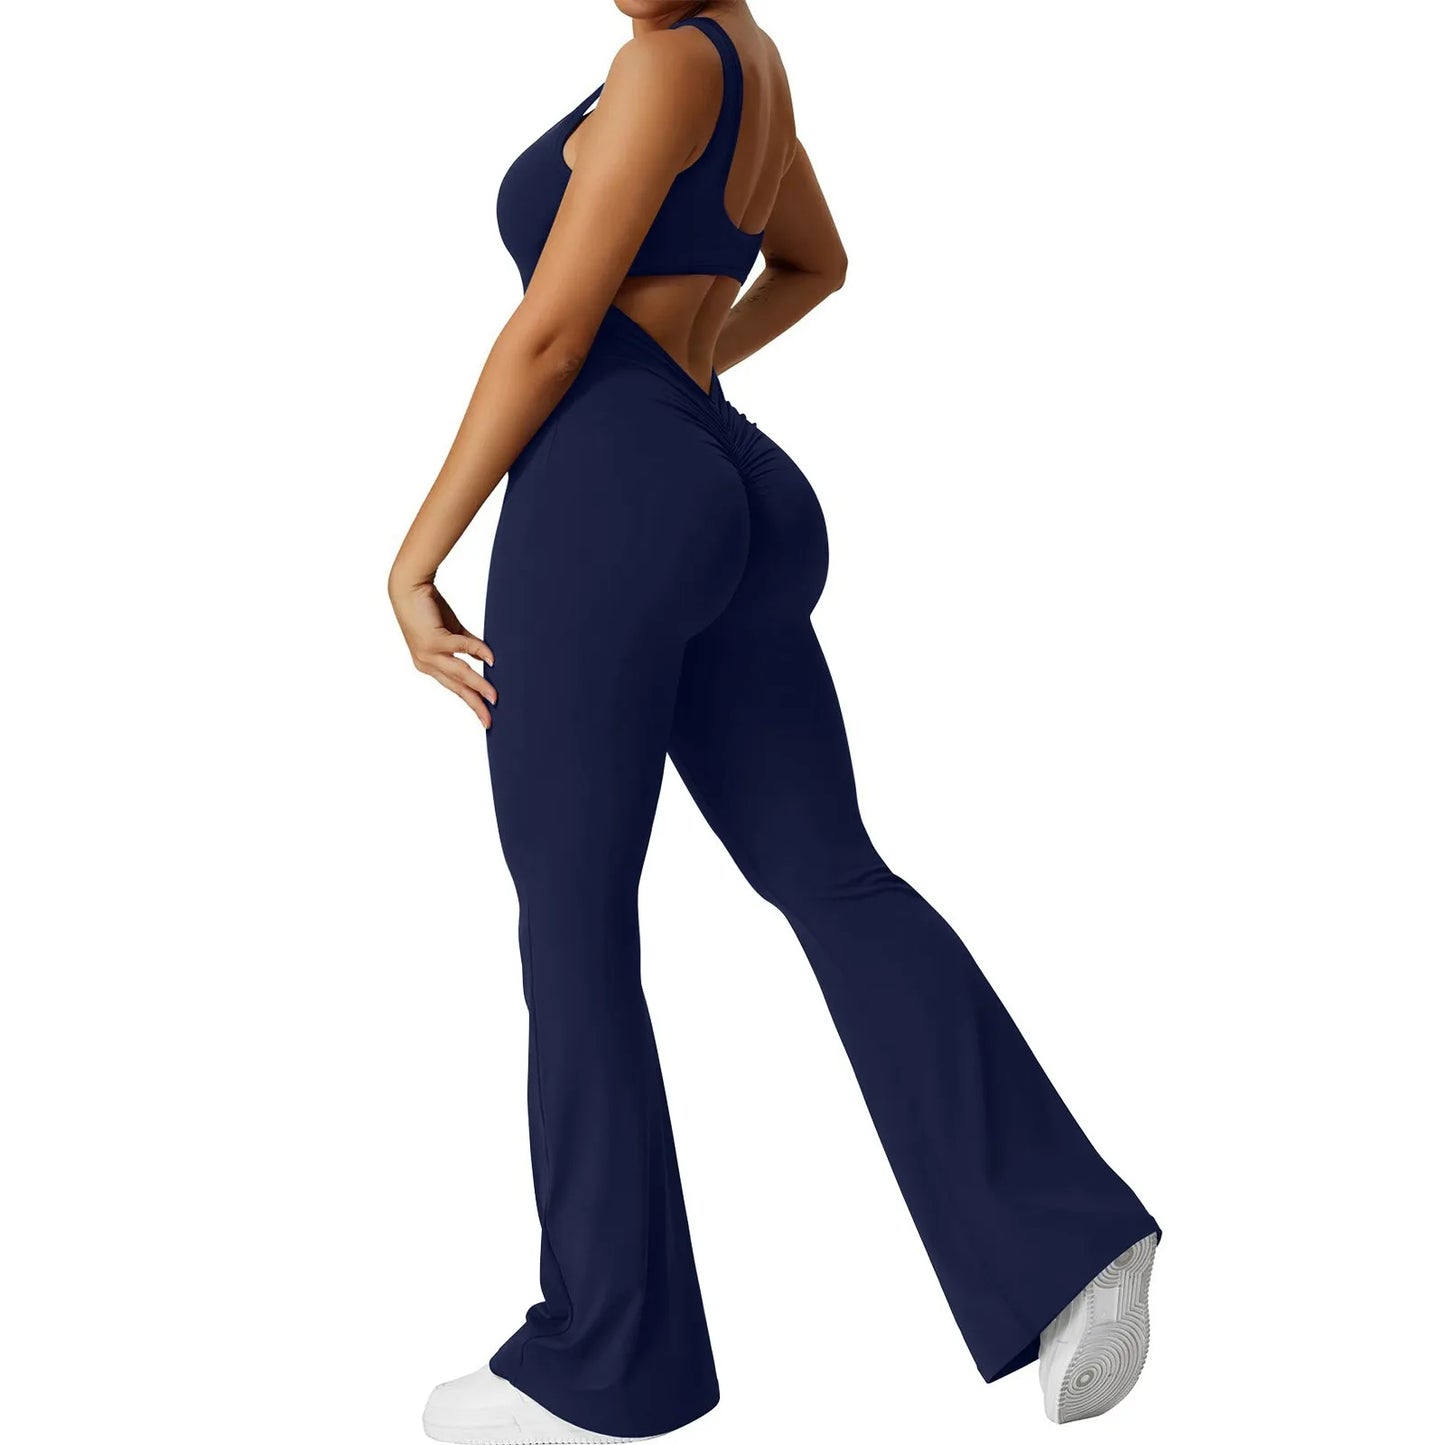 Women's Fashion Jumpsuit Solid Color Sexy Backless Tight Fitting Clothing Elastic Sports Sleeveless Jumpsuit комбинезон женский Yoga Shop 2018